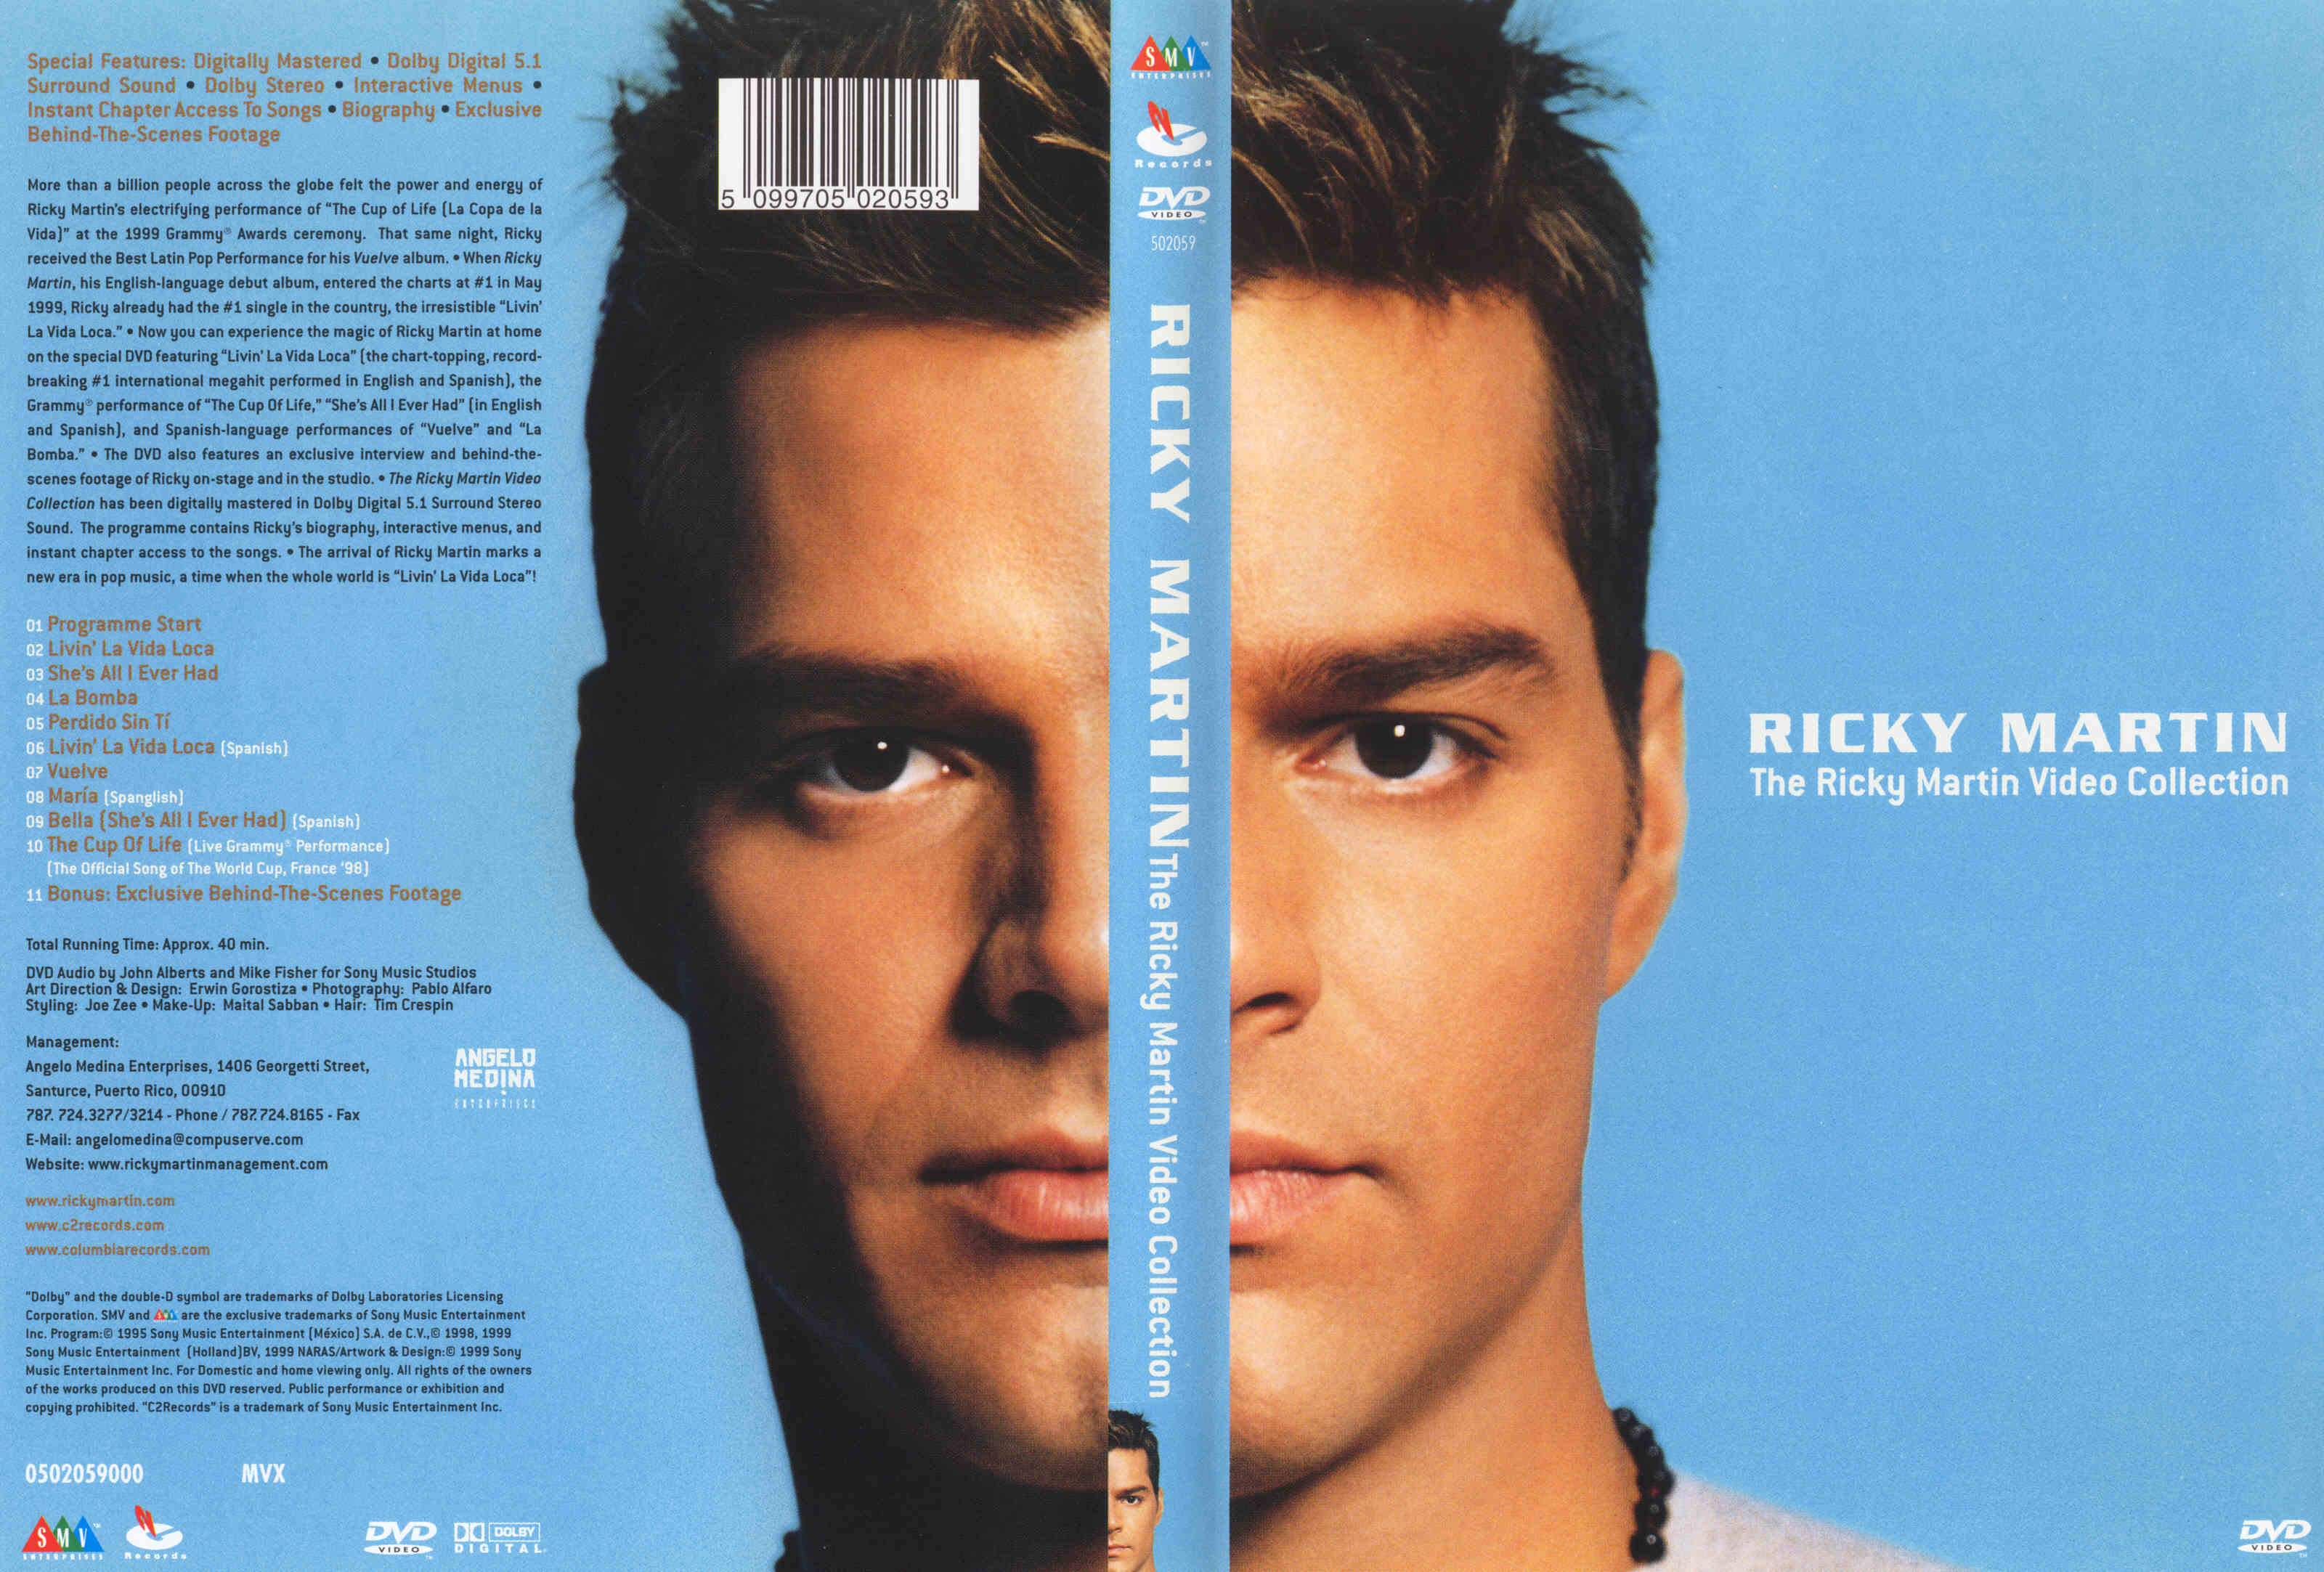 Jaquette DVD Ricky Martin Video Collection